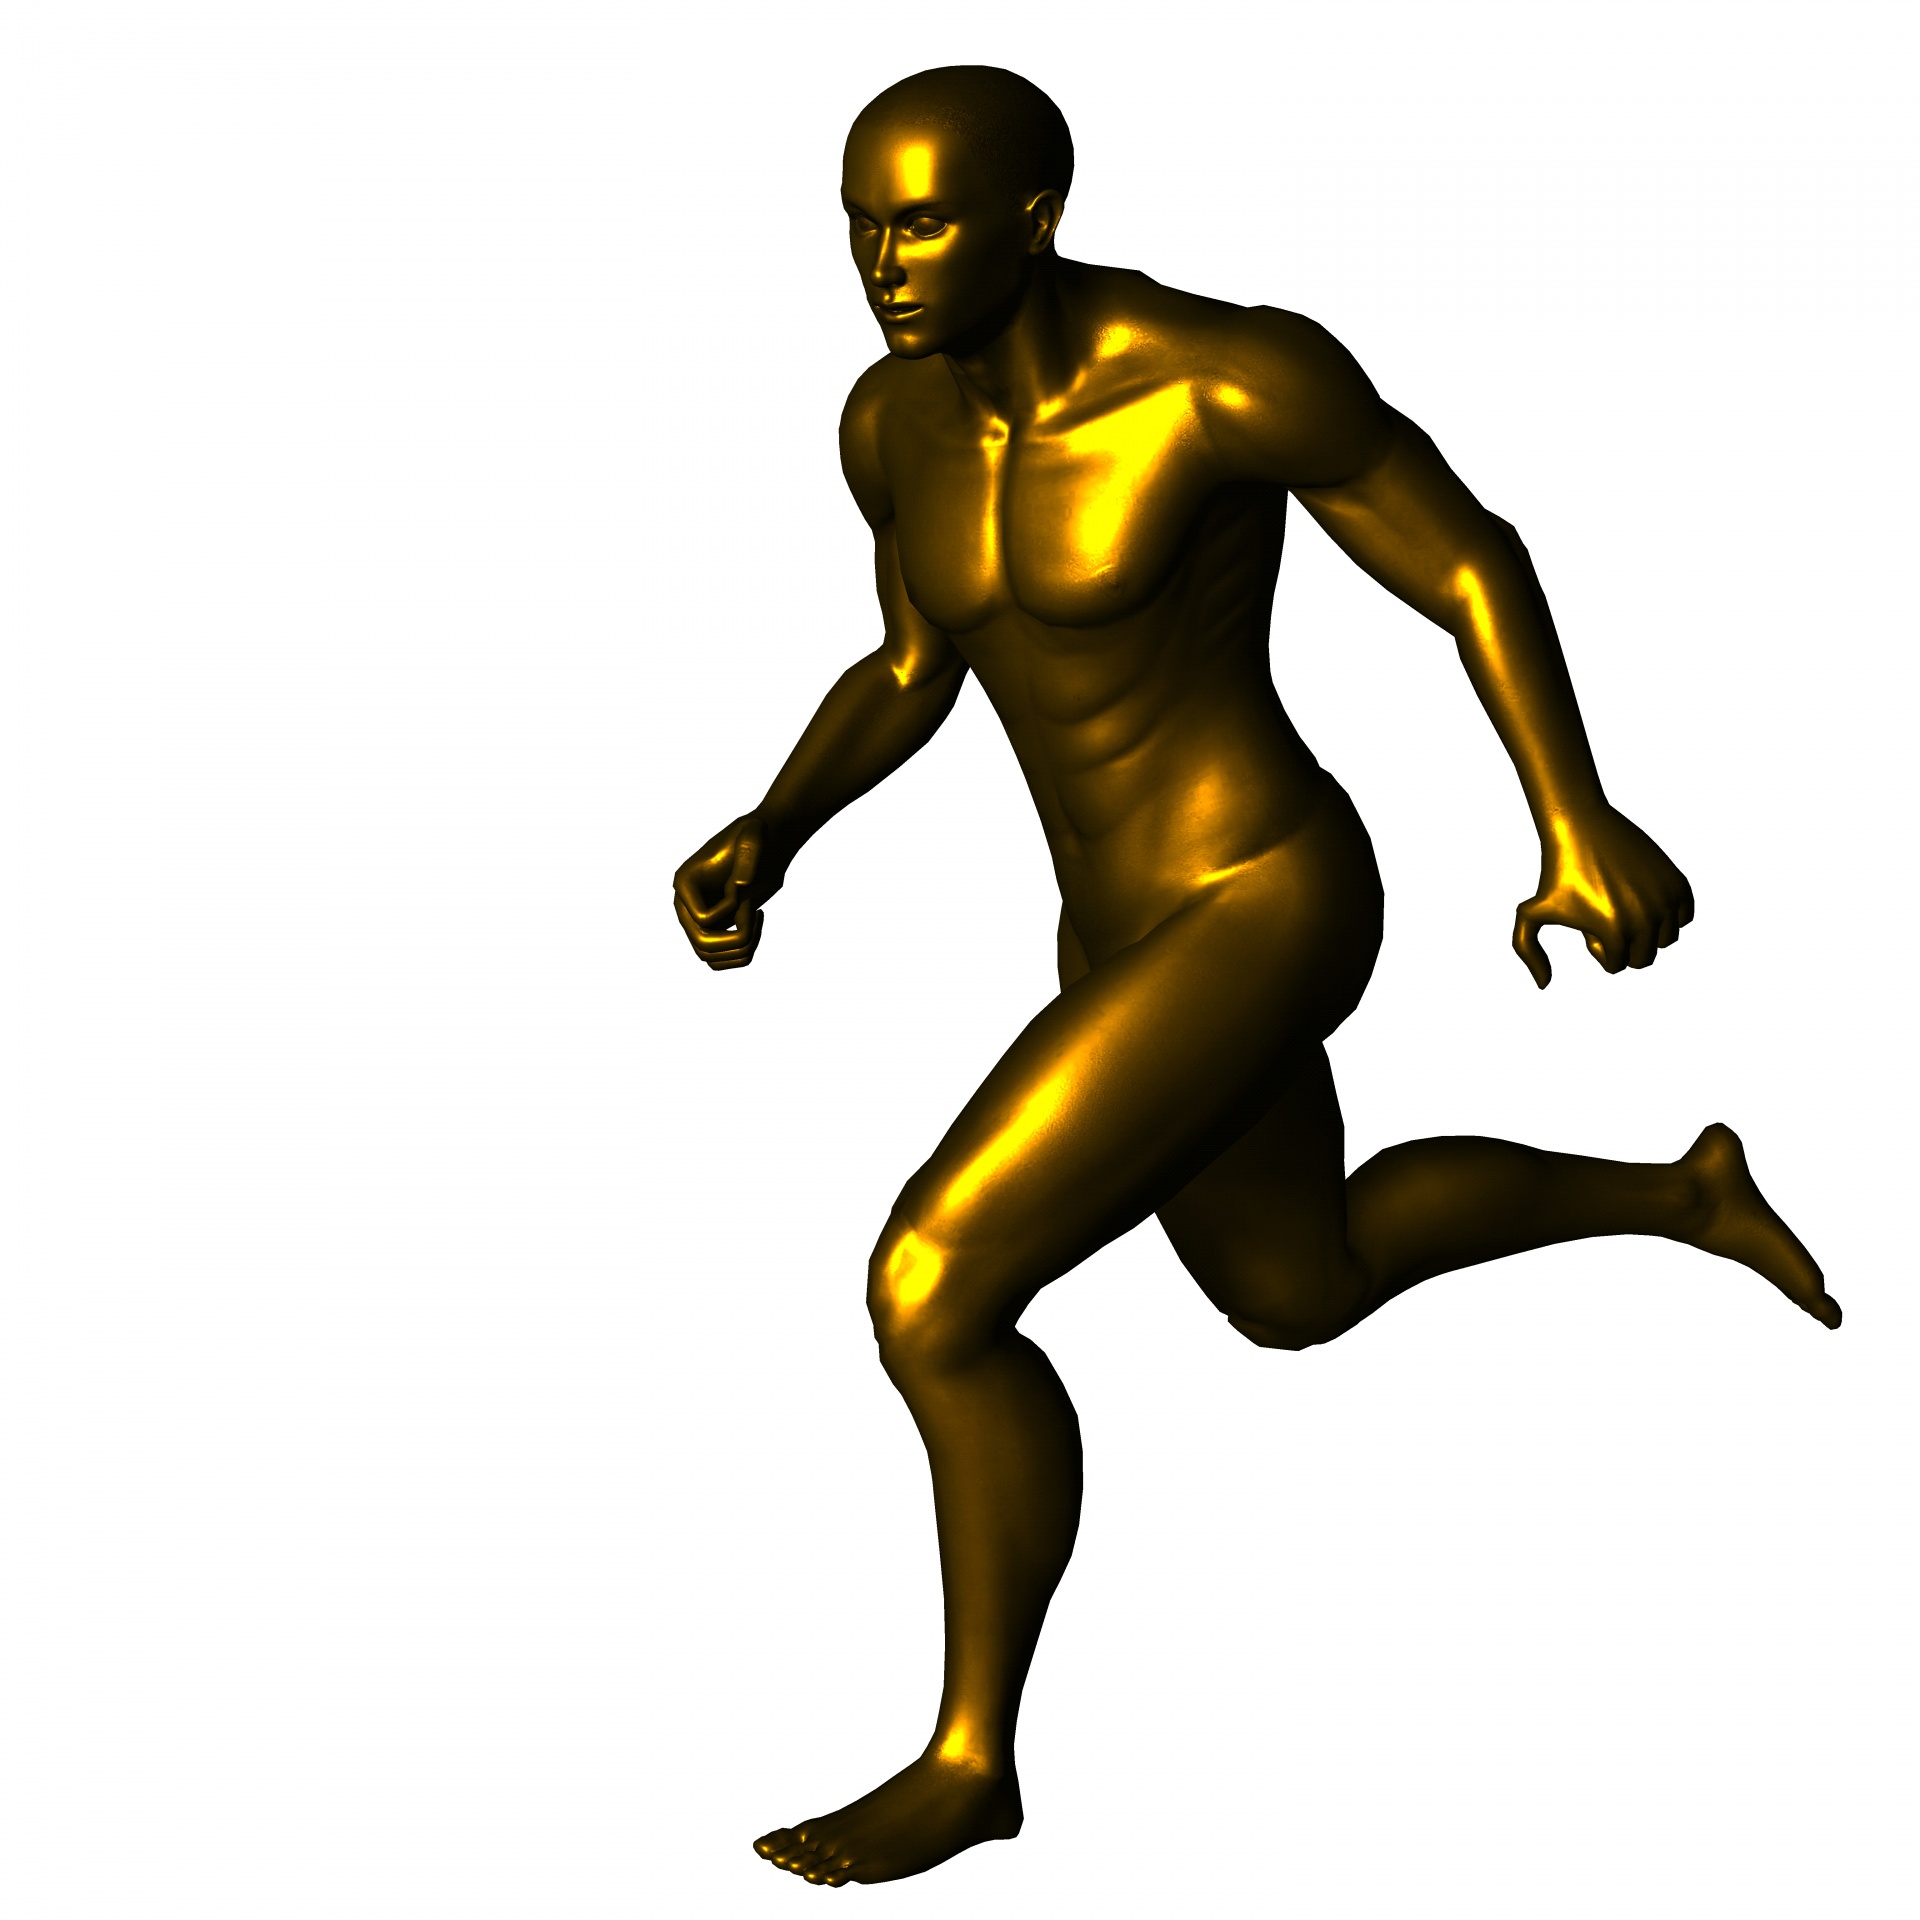 Golden Runner 2 Free Stock Photo - Public Domain Pictures